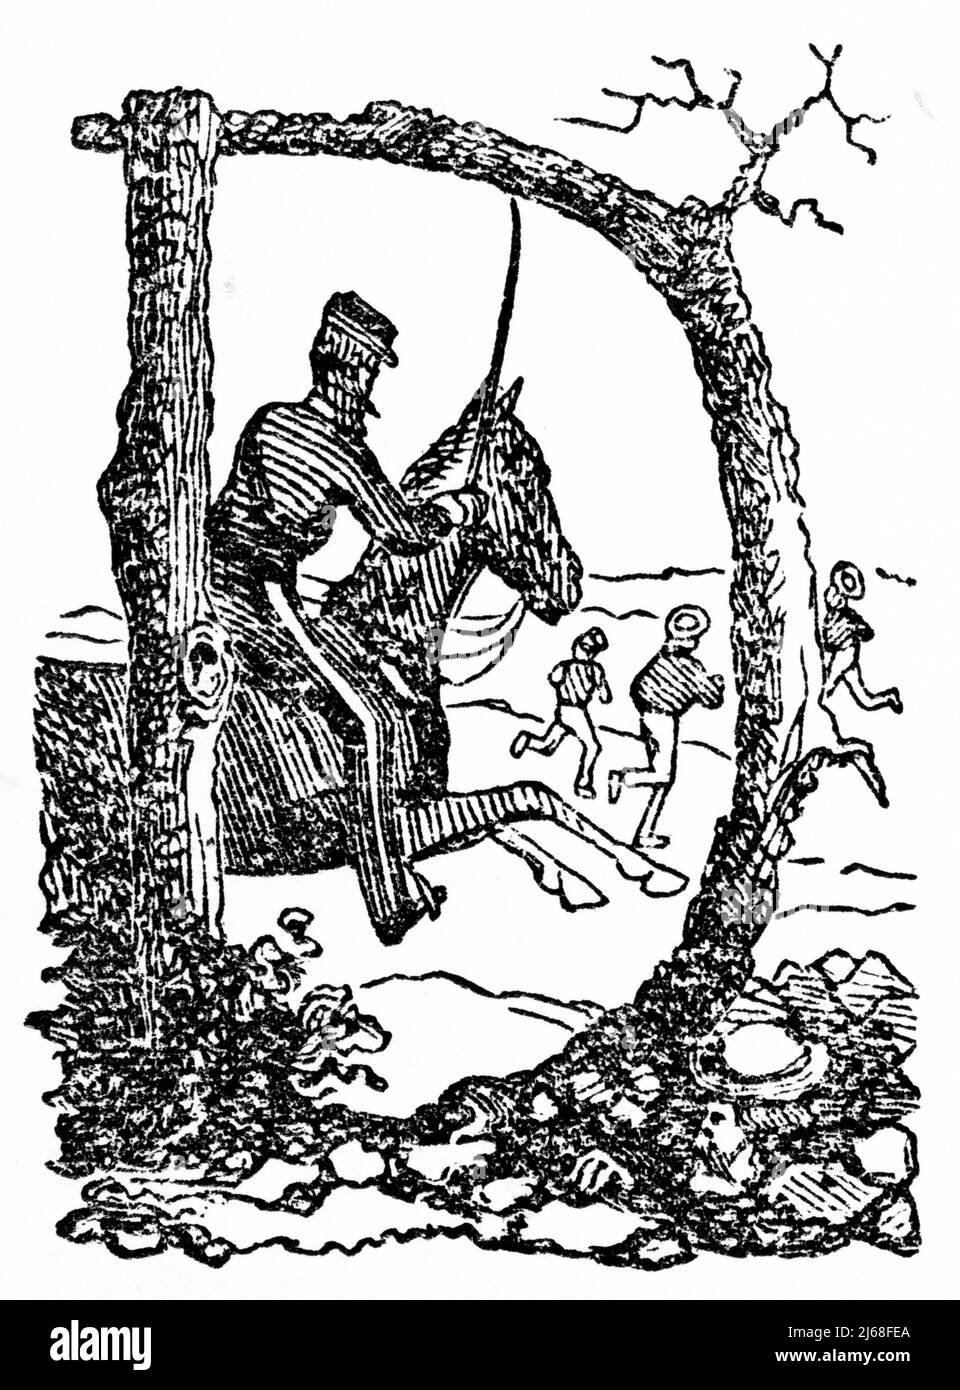 Engraving of embellished letter D from a chapter heading on the history of Ballarat, VIctoria, Australia. the illustration features a trooper chasing miners to check their mining licesnes - typical life on the goldfields. Stock Photo